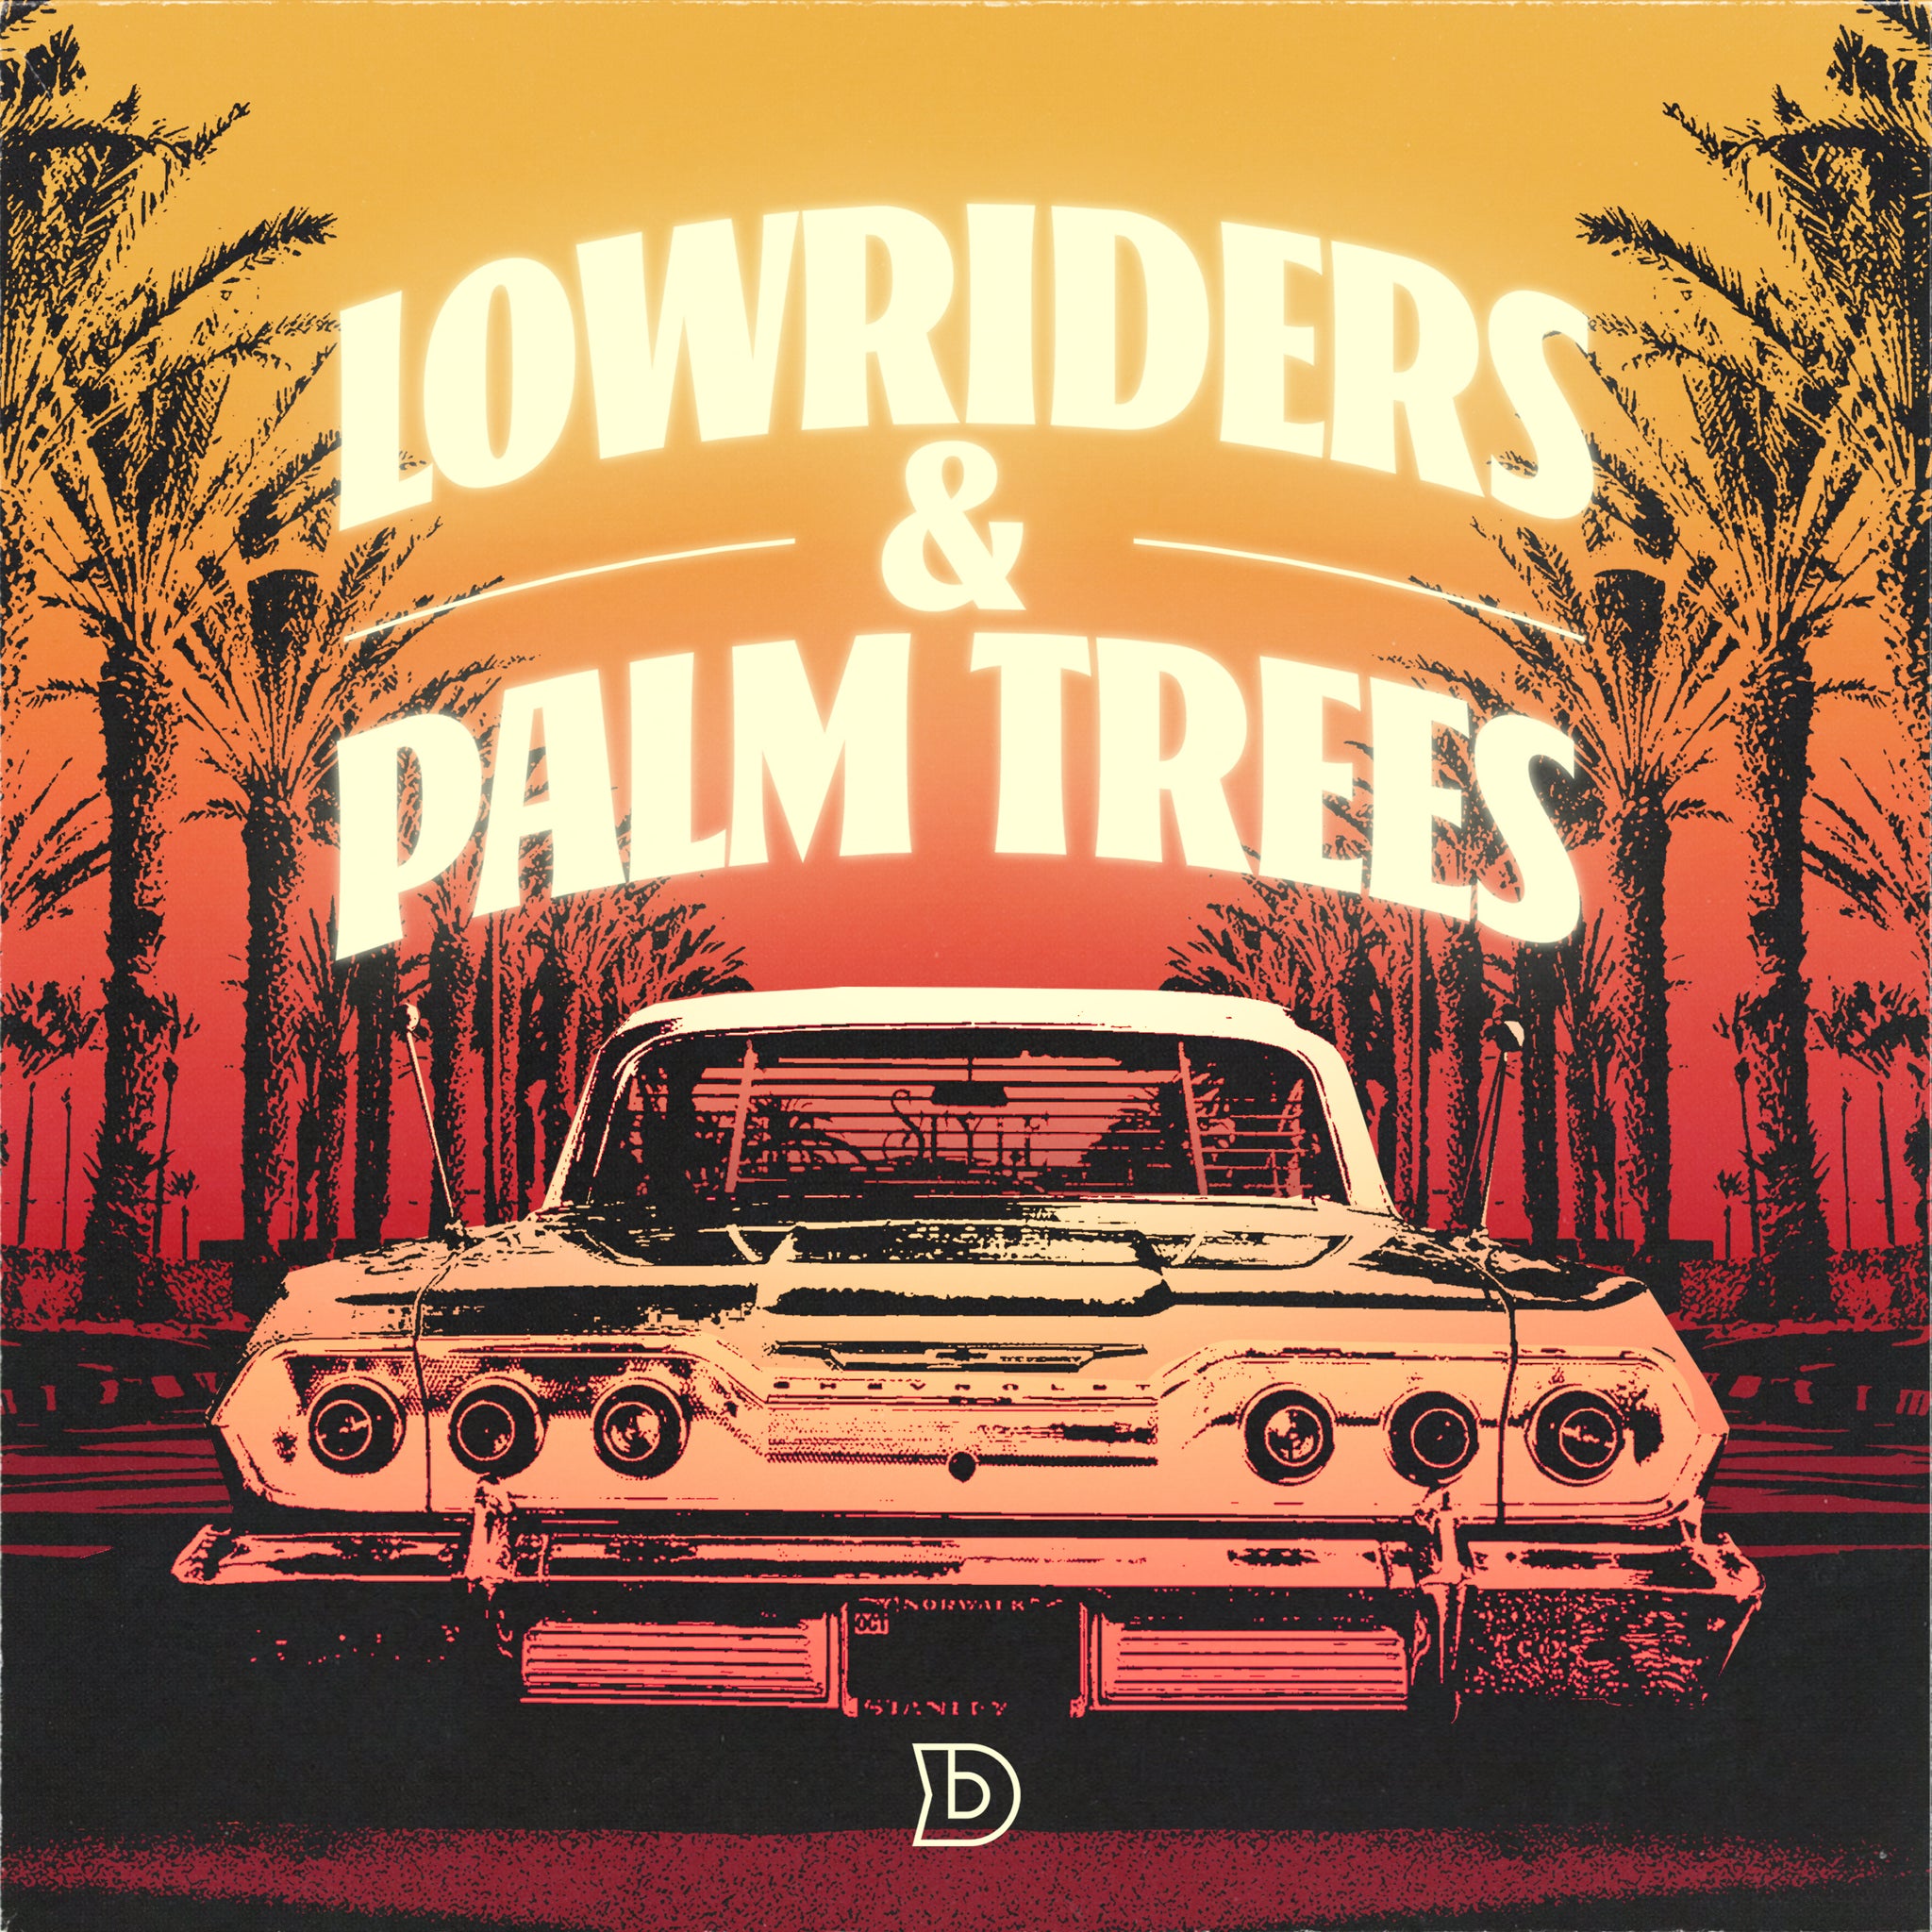 Lowriders and Palm Trees